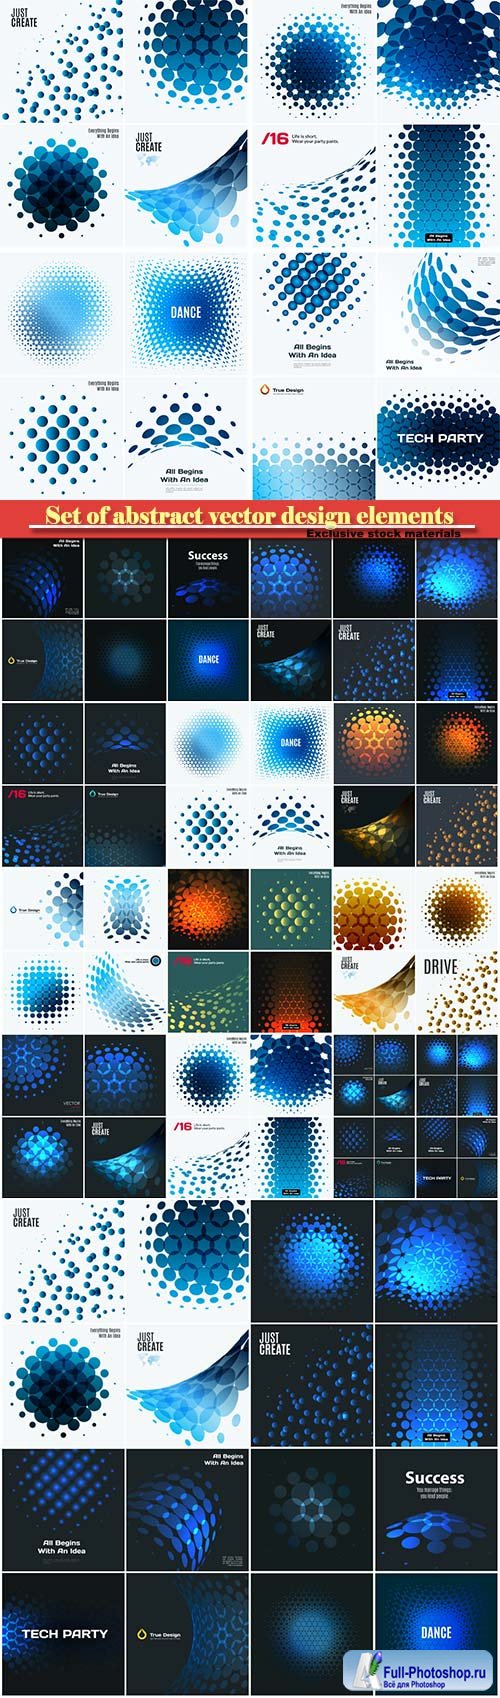 Set of abstract vector design elements for graphic layout, modern business template